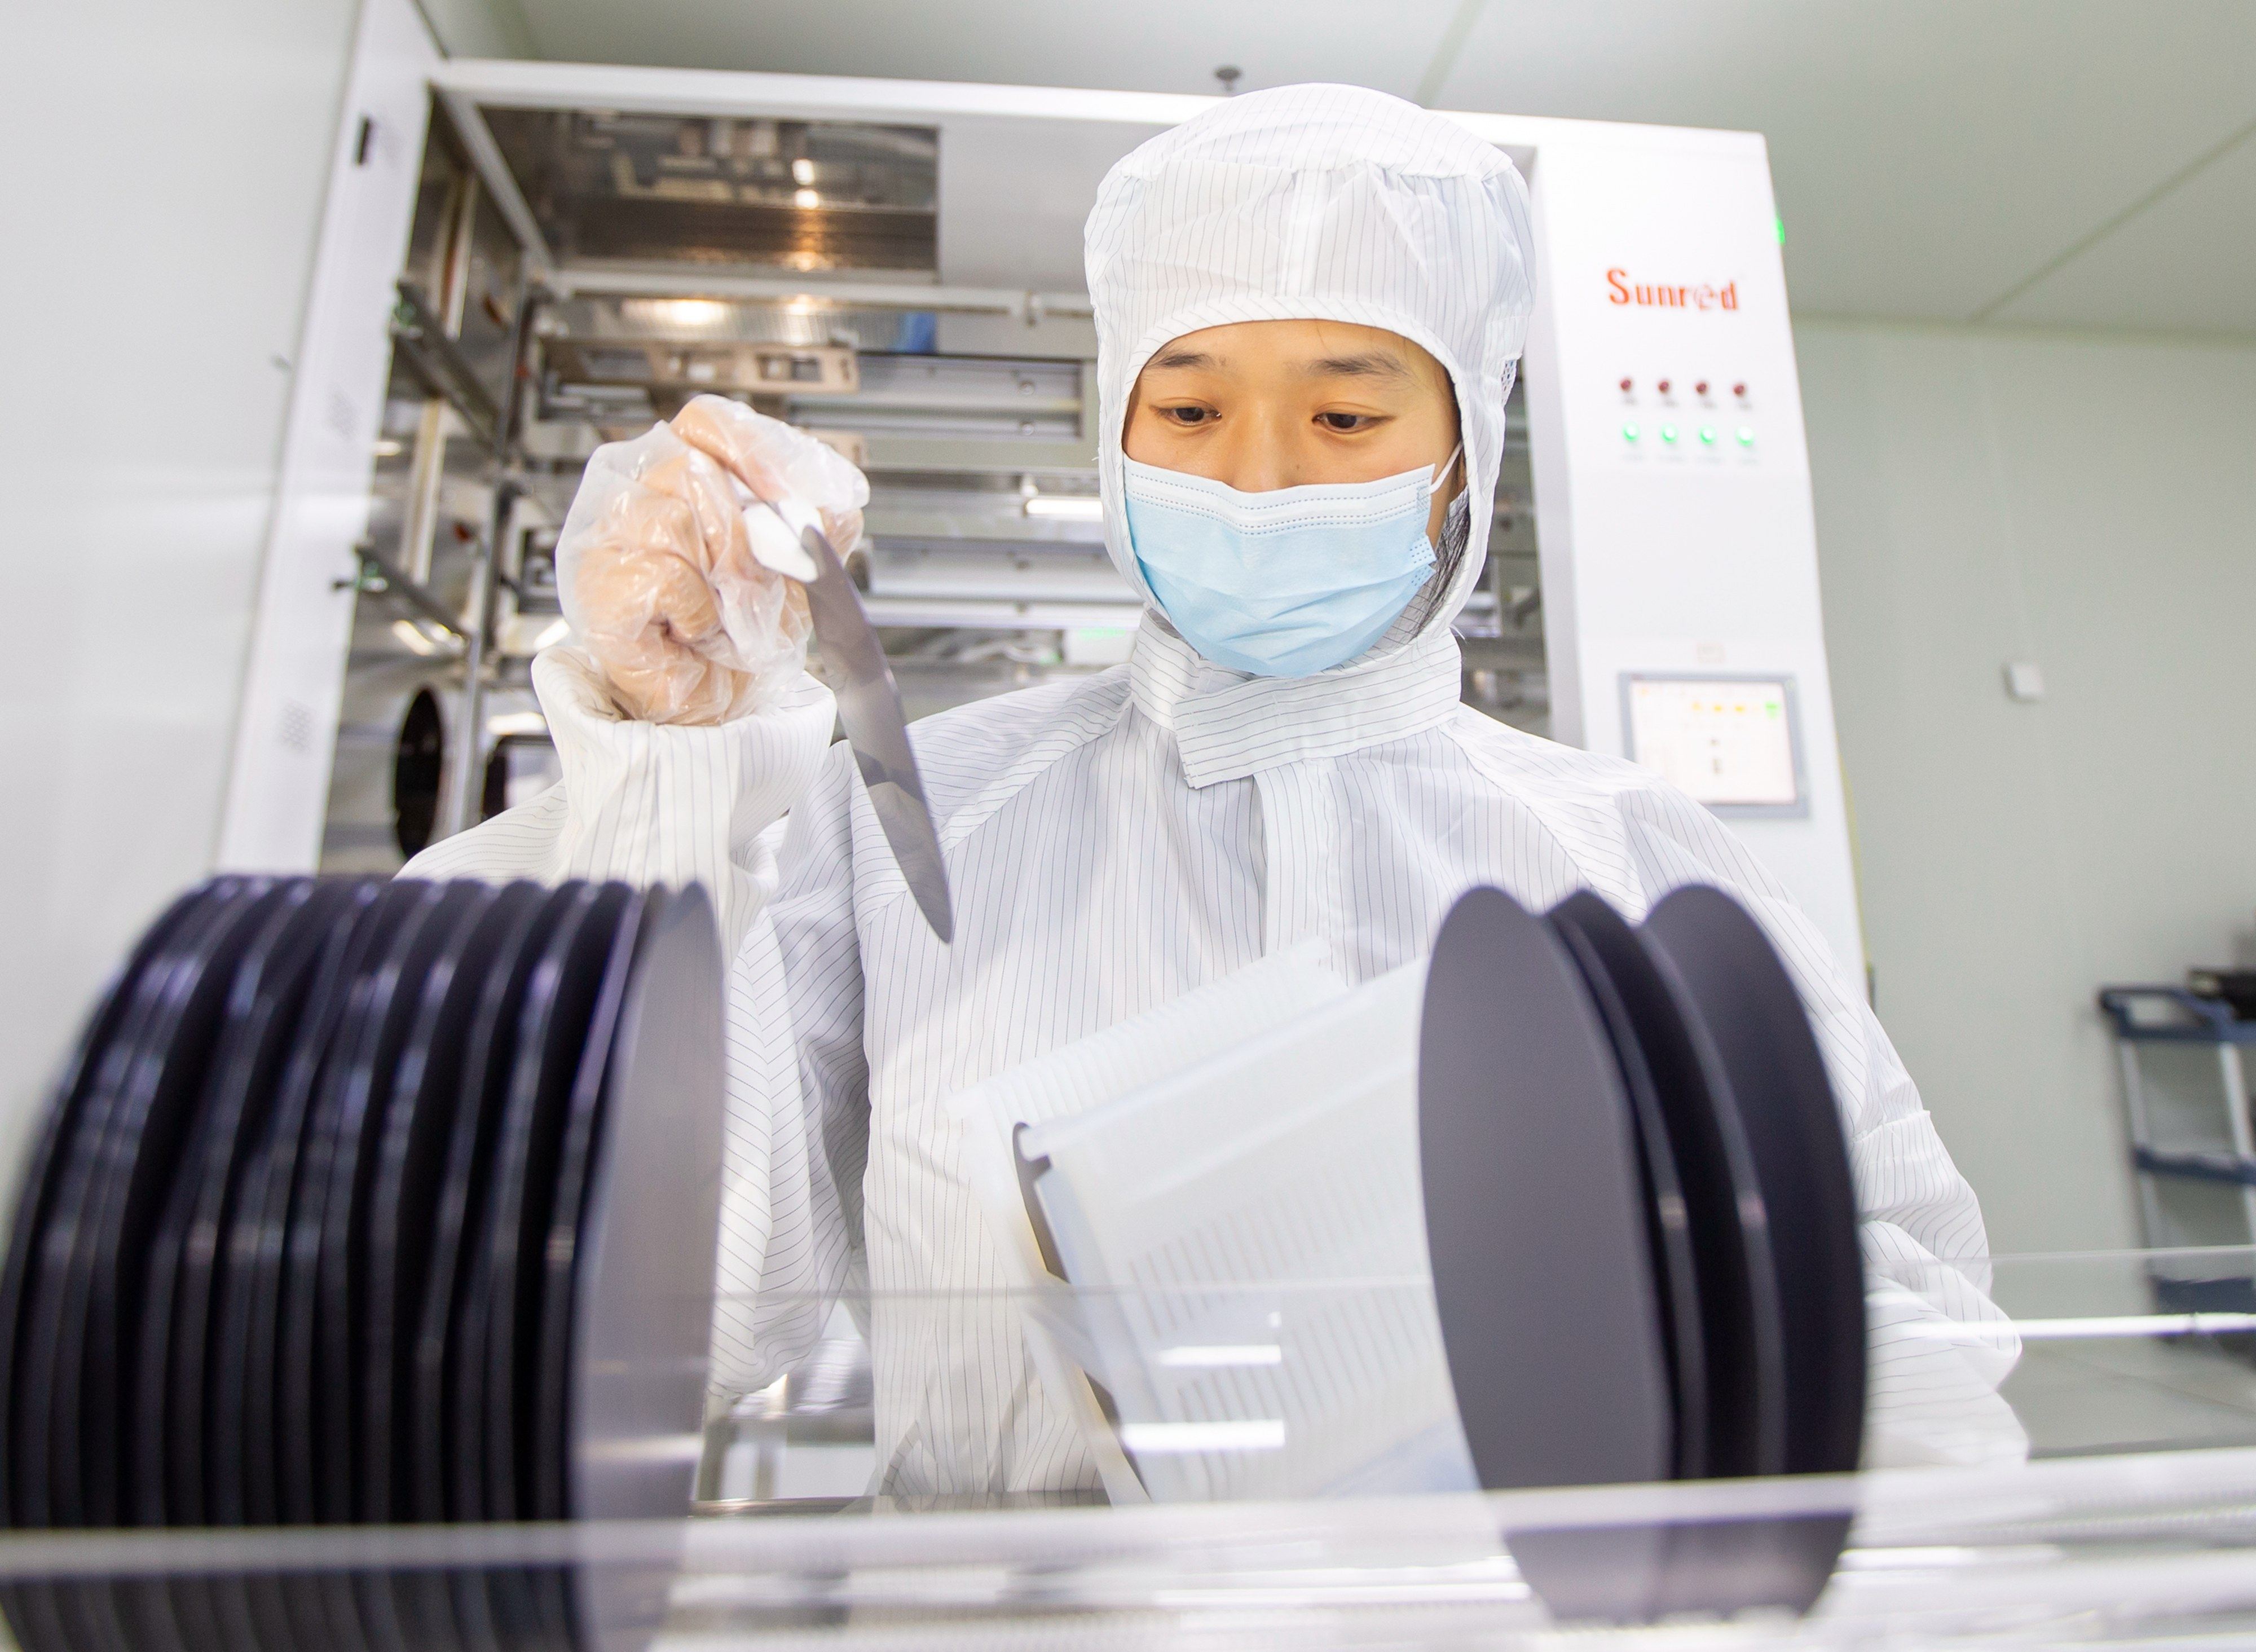 A new US investment ban aims to blunt China’s access to sensitive technologies such as semiconductors. Photo: VCG via Getty Images